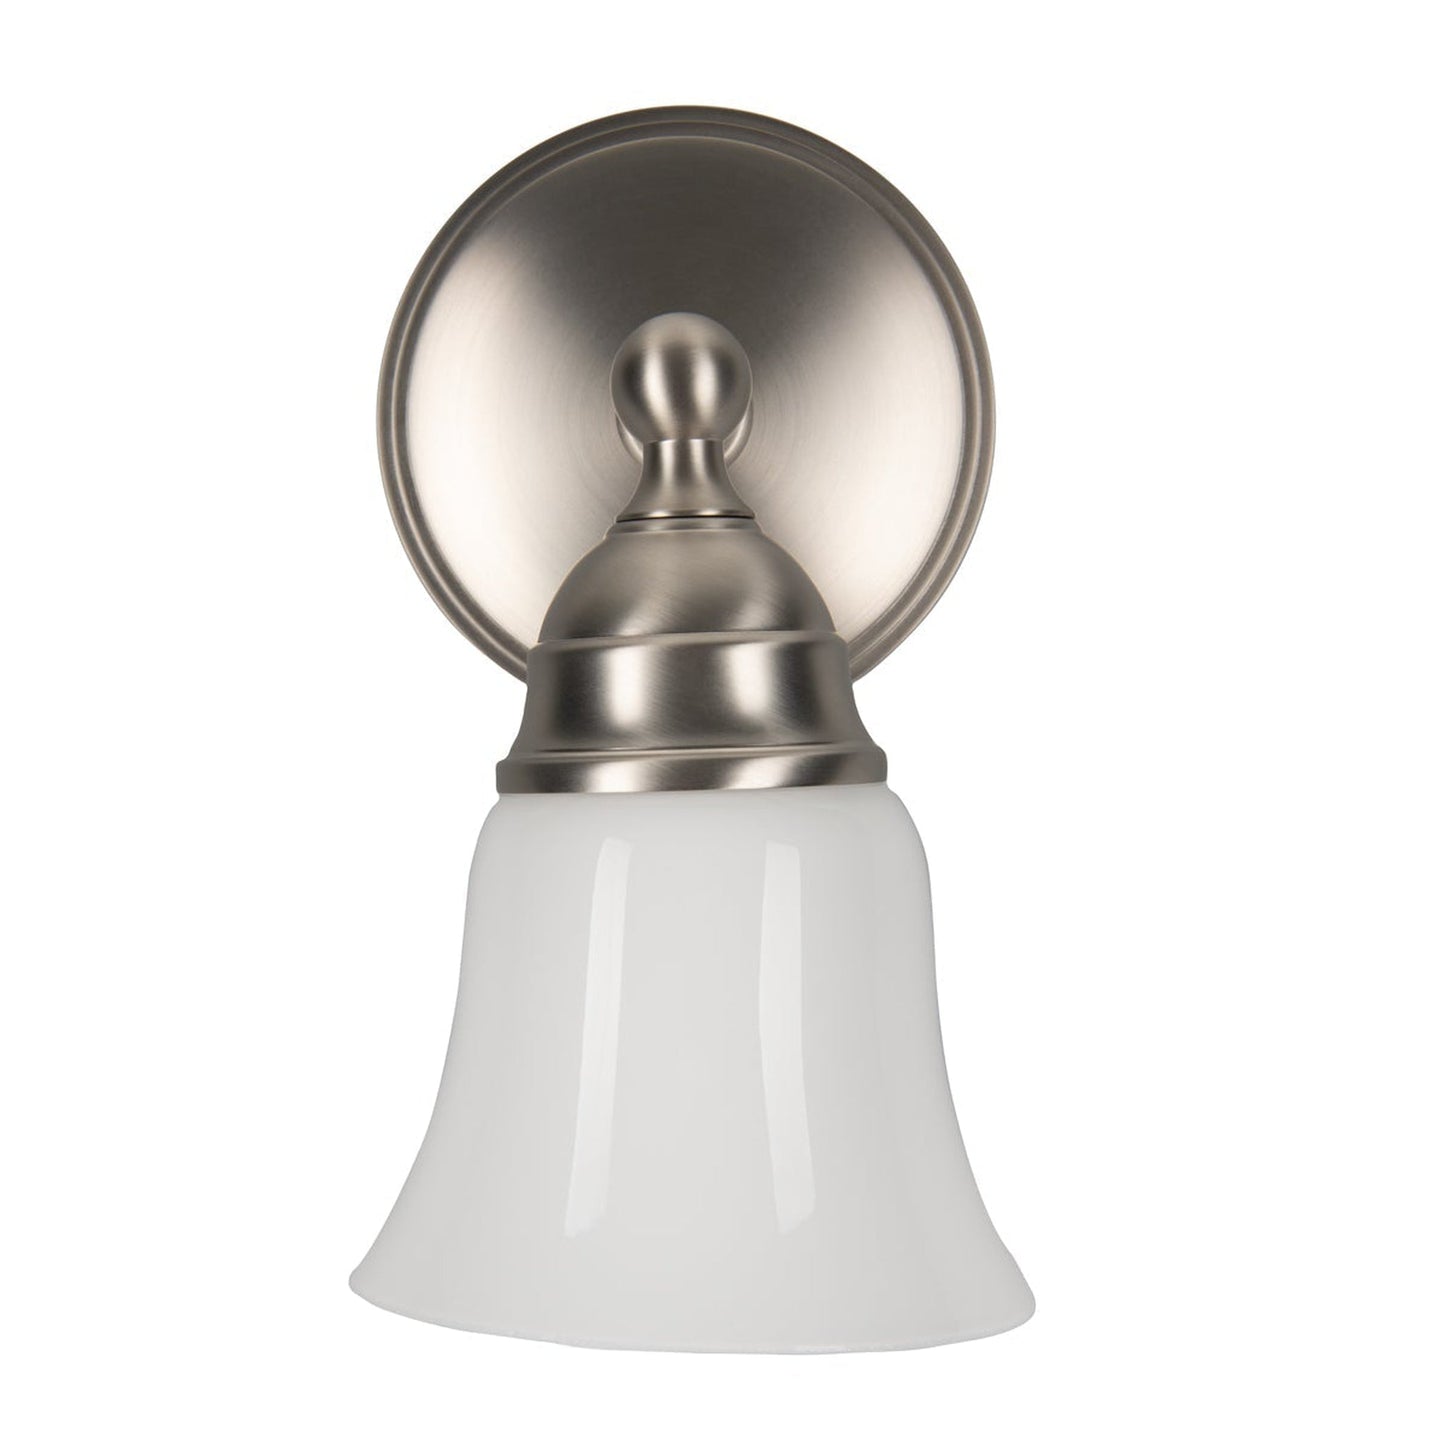 Norwell Lighting Sophie 8" x 5" 1-Light Sconce Brushed Nickel Vanity Light With Bell Shiny Opal Glass Diffuser